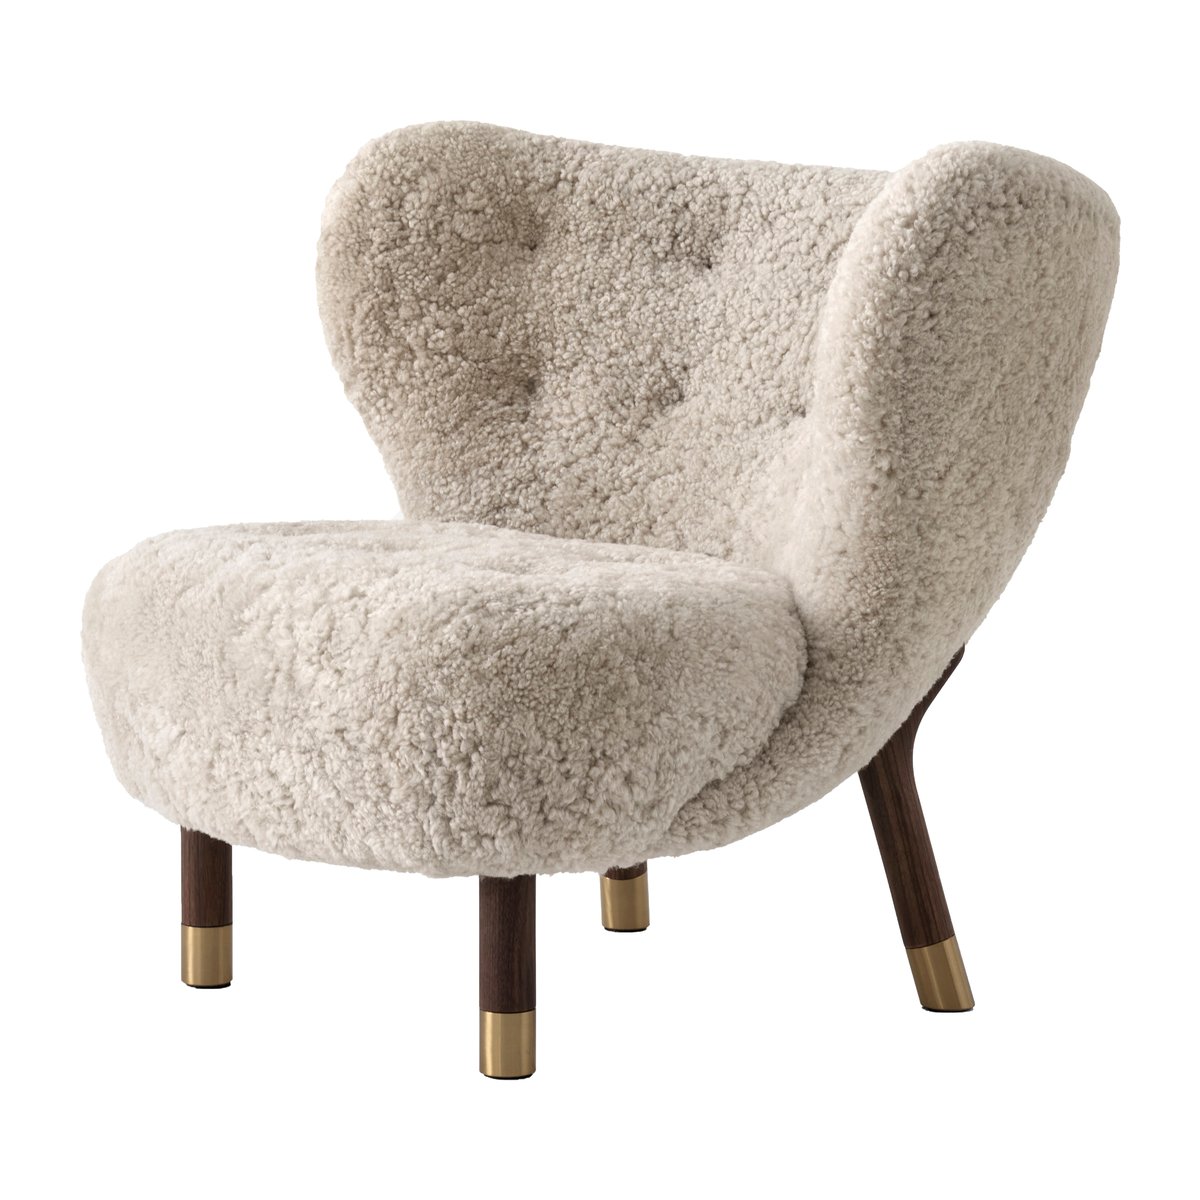 &Tradition Little Petra VB1 fauteuil Limited Edition Walnoot, messing-Moonlight